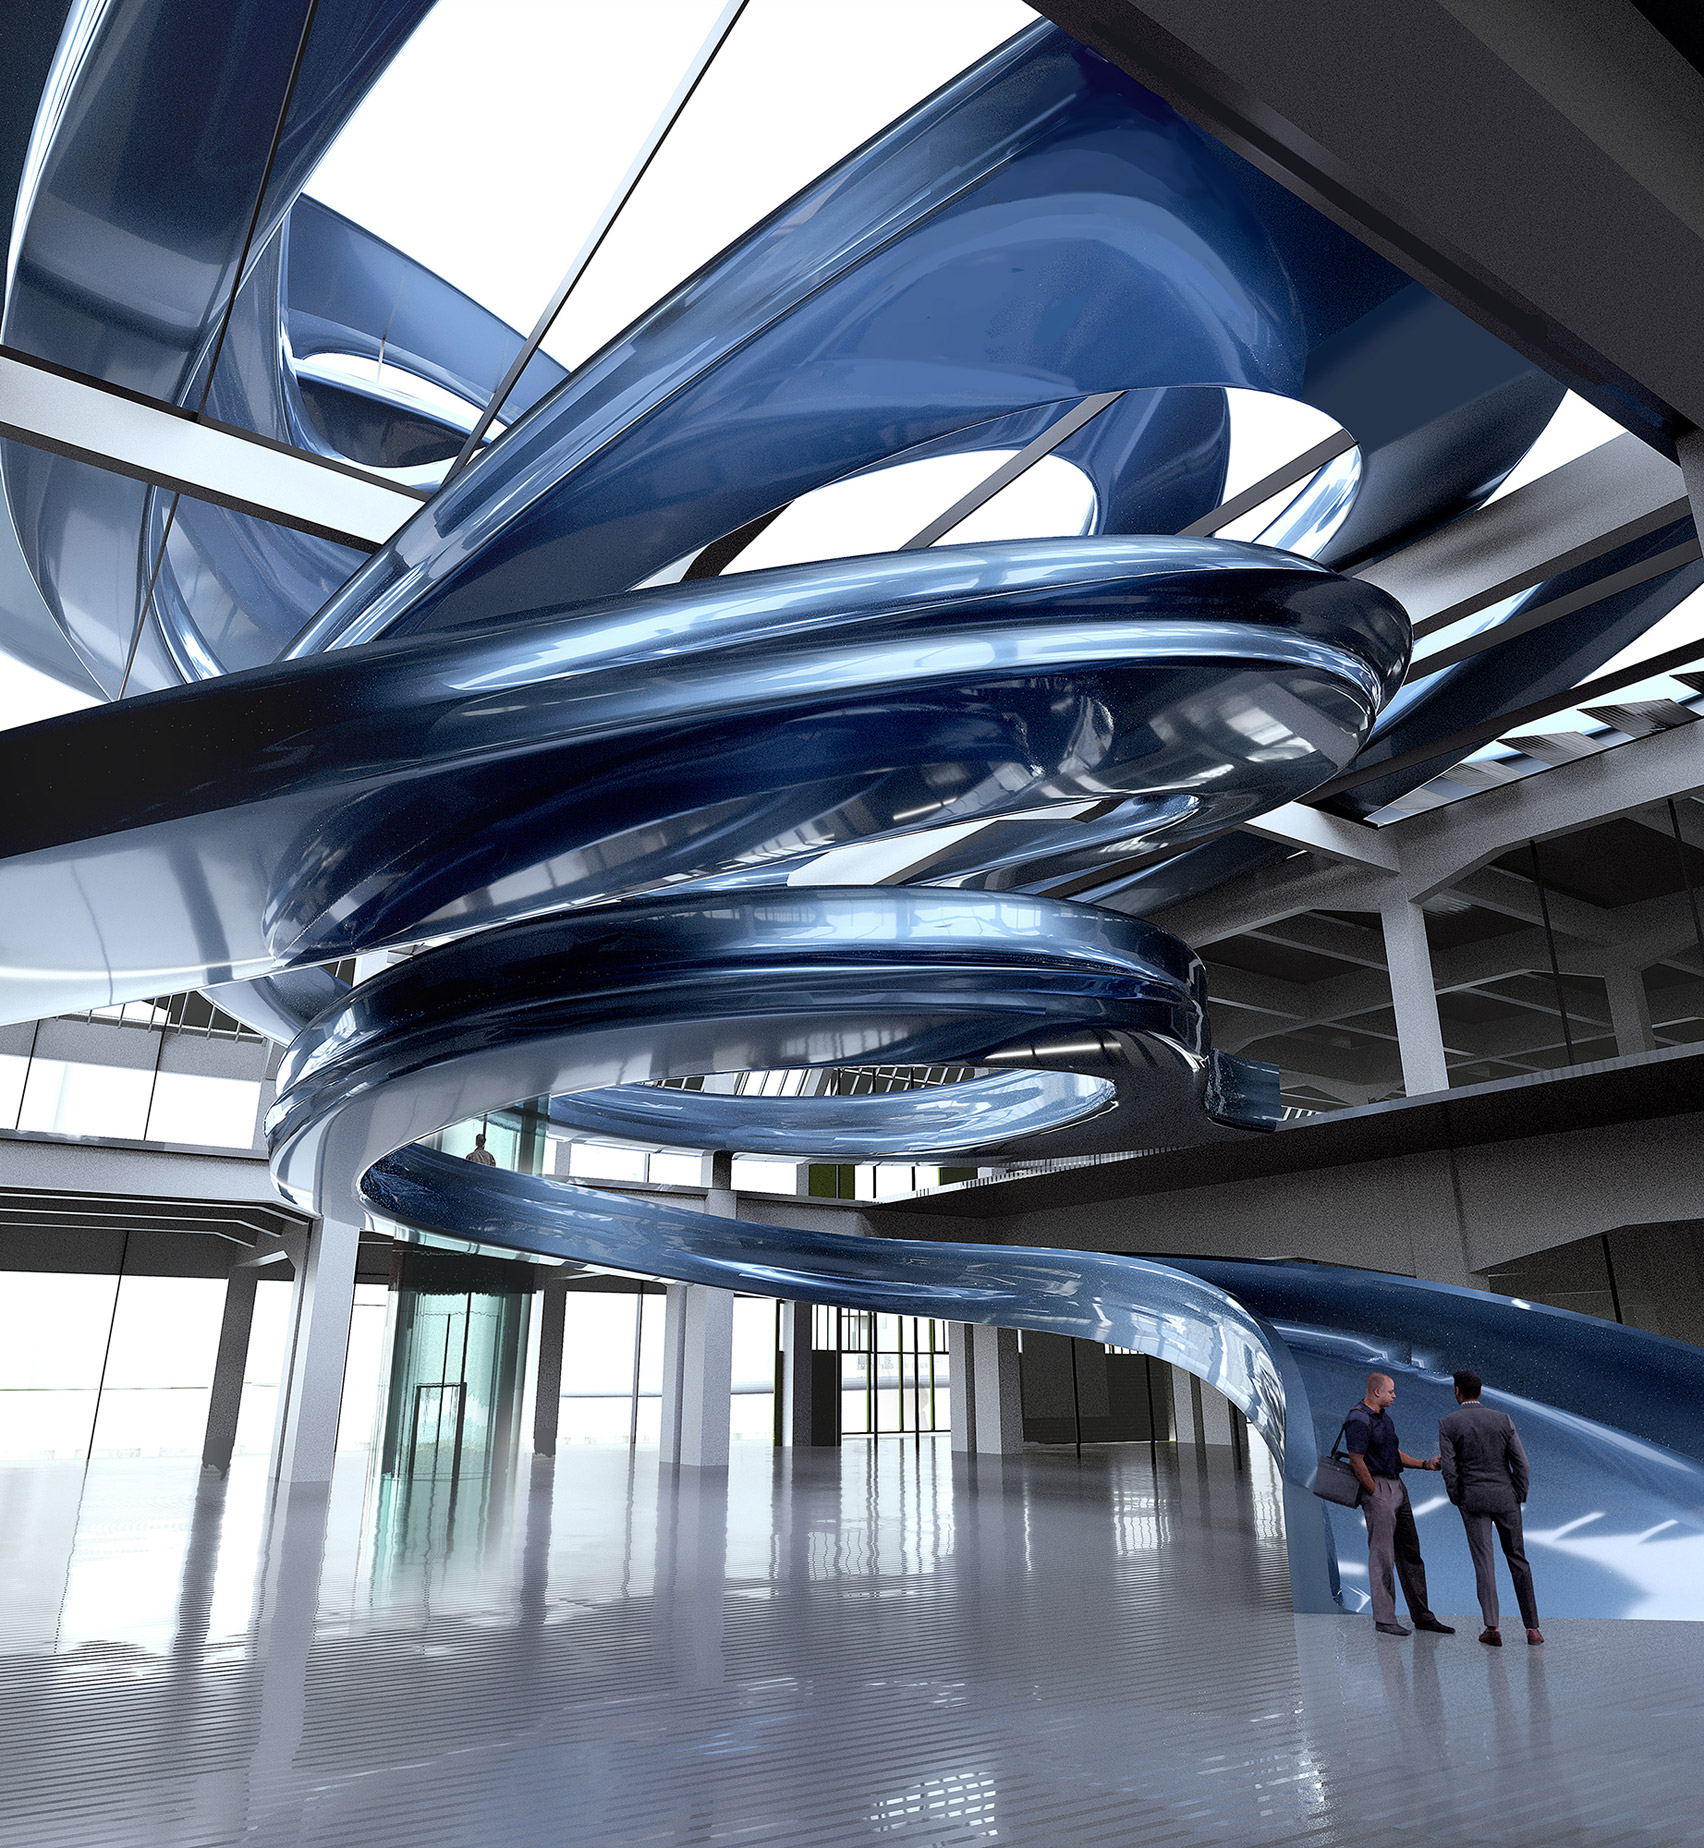 MAD to build huge blue spiral staircase in old Fenix warehouse in Rotterdam